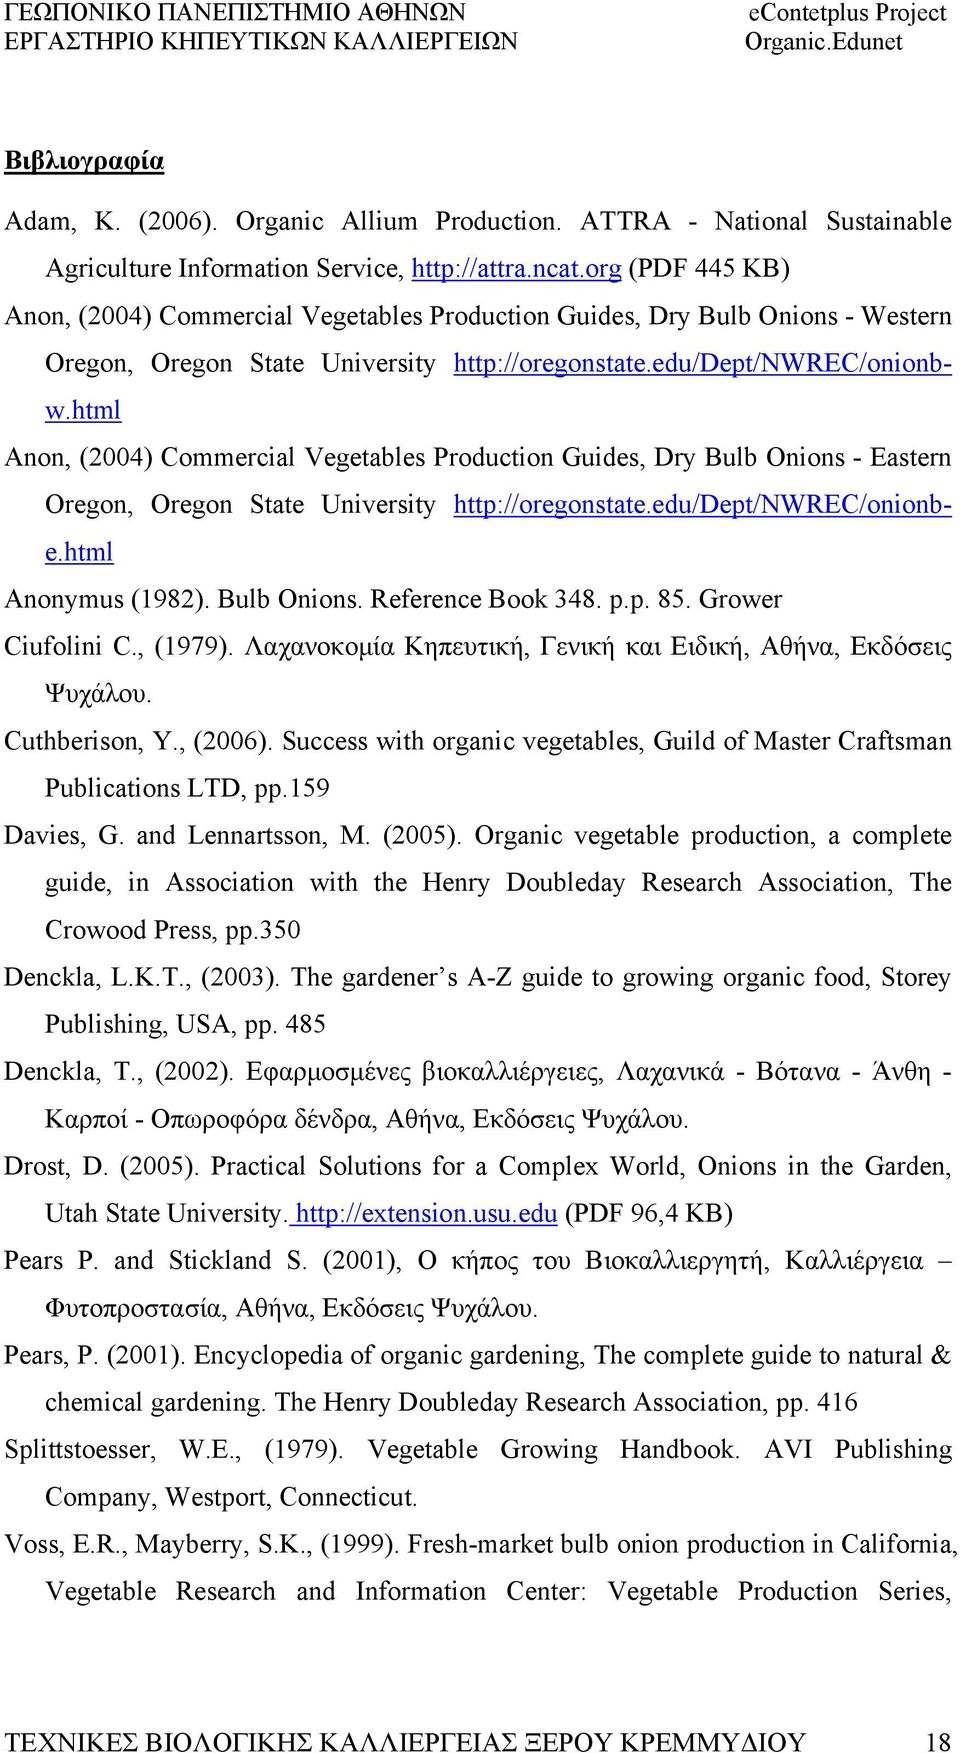 html Anon, (2004) Commercial Vegetables Production Guides, Dry Bulb Onions - Eastern Oregon, Oregon State University http://oregonstate.edu/dept/nwrec/onionbe.html Anonymus (1982). Bulb Onions. Reference Book 348.